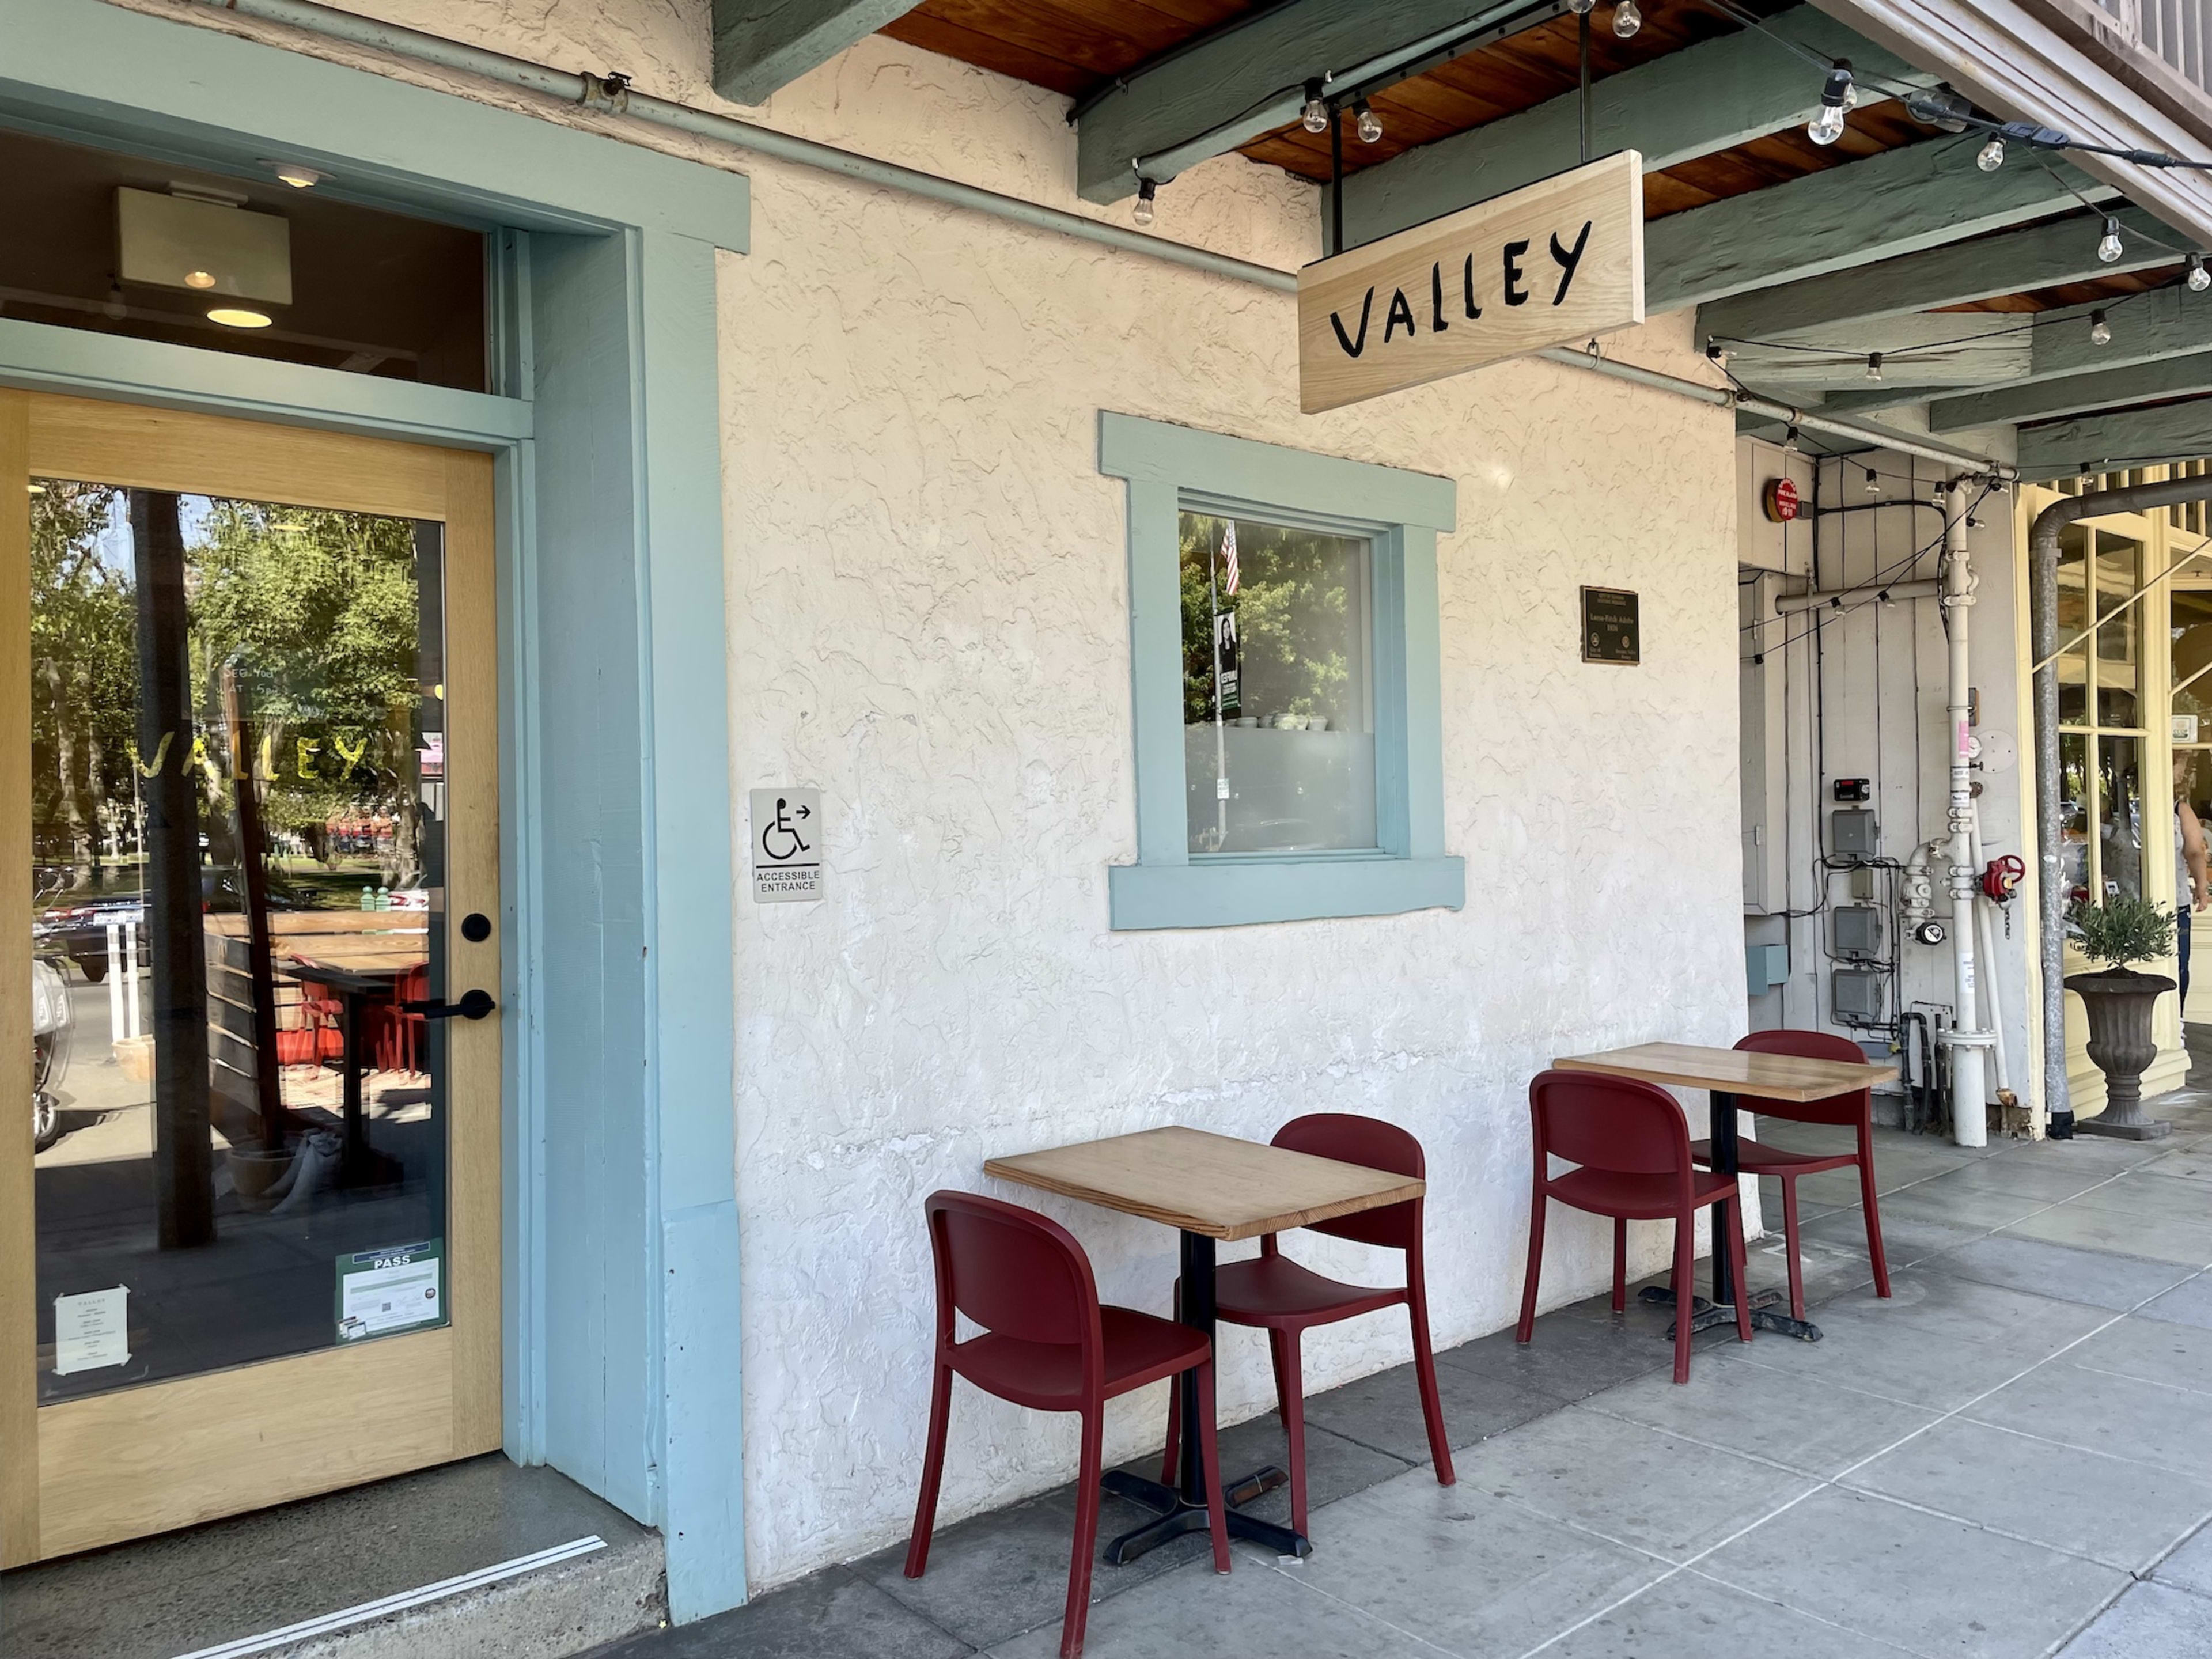 Valley review image